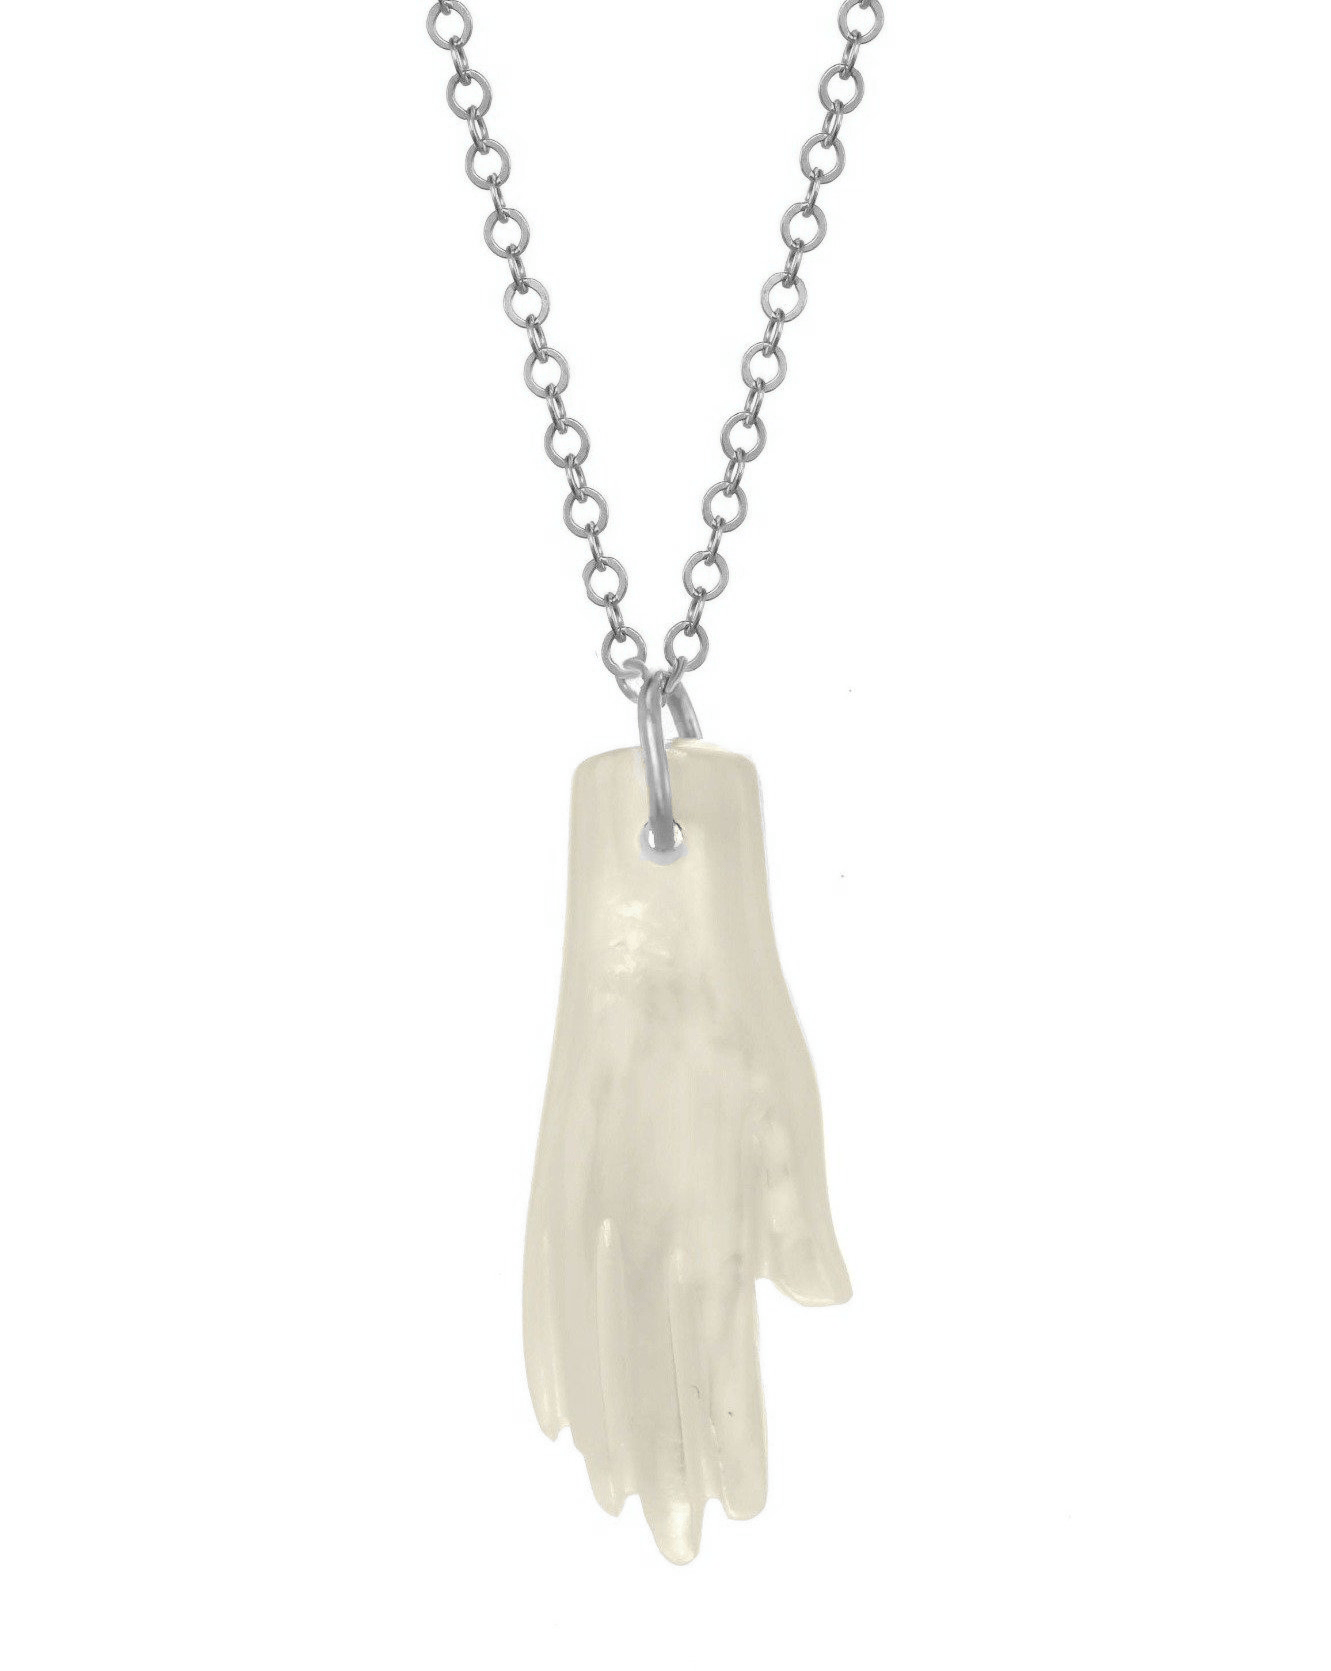 Hana Necklace by KOZAKH. A 16 to 18 inch adjustable length necklace in Sterling Silver, featuring a hand-carved Mother of Pearl hand charm.